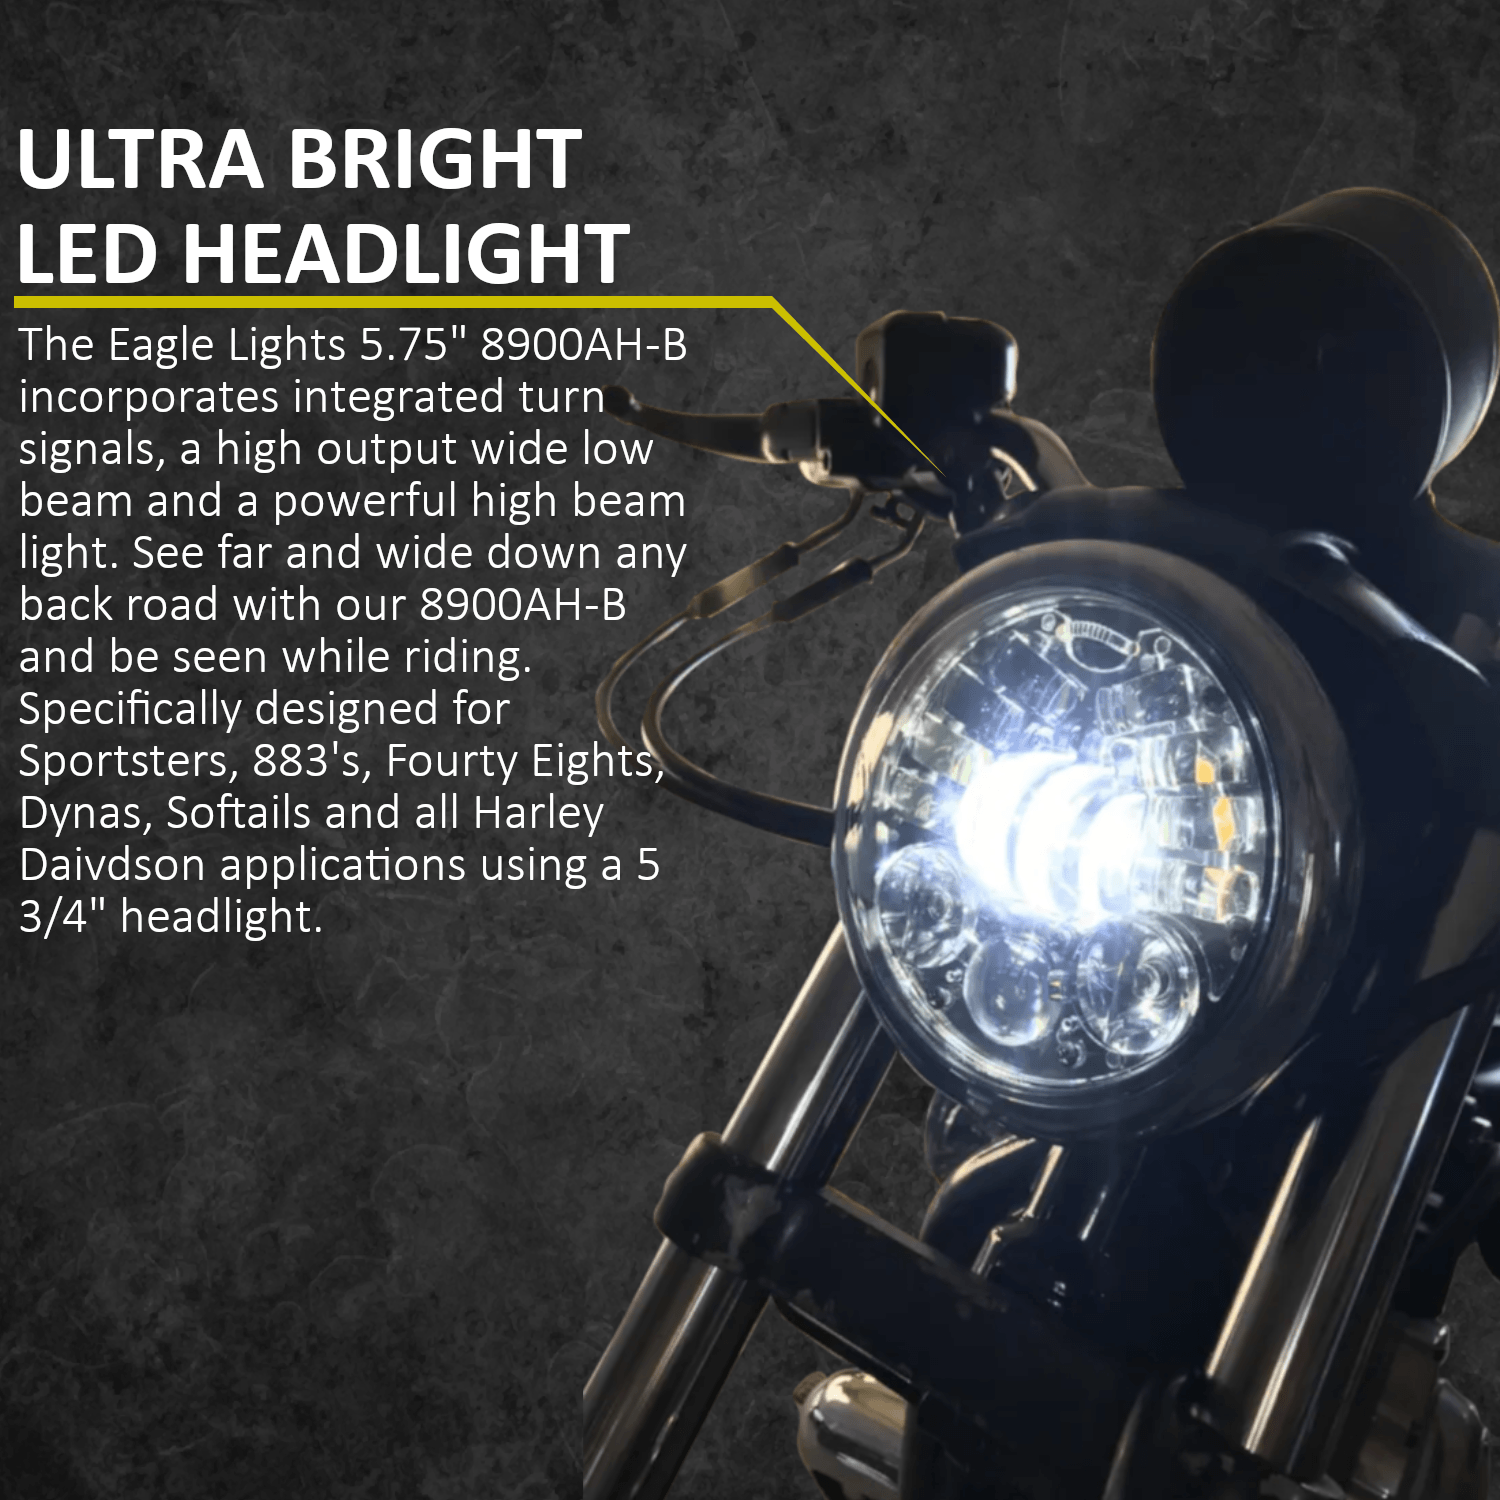 Eagle Lights 5.75 inch 8900AH-B LED Headlight with Integrated Turn Signals for Harley Davidson